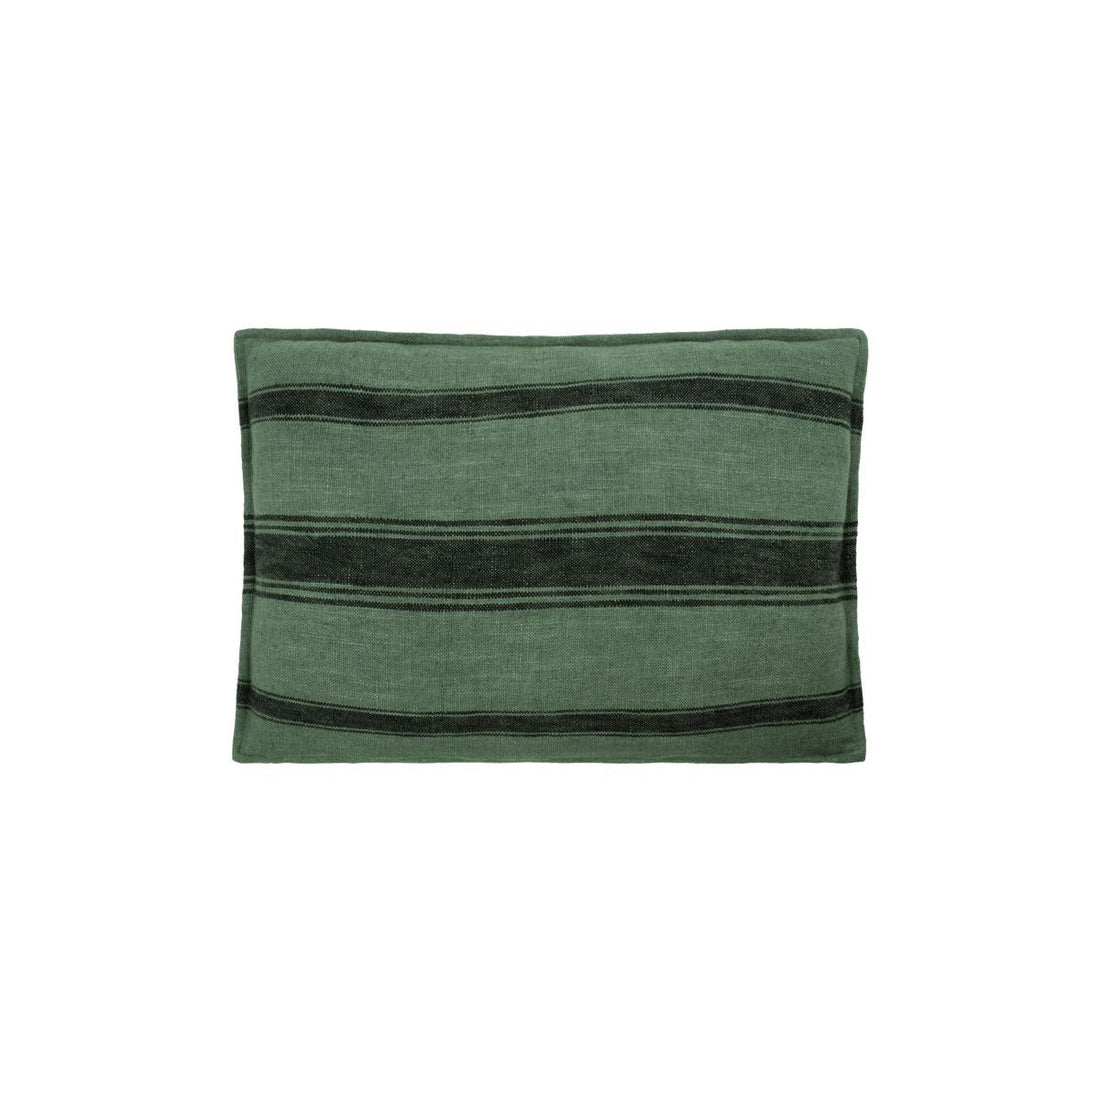 House Doctor Pillow Covers, Hdsuto, Green